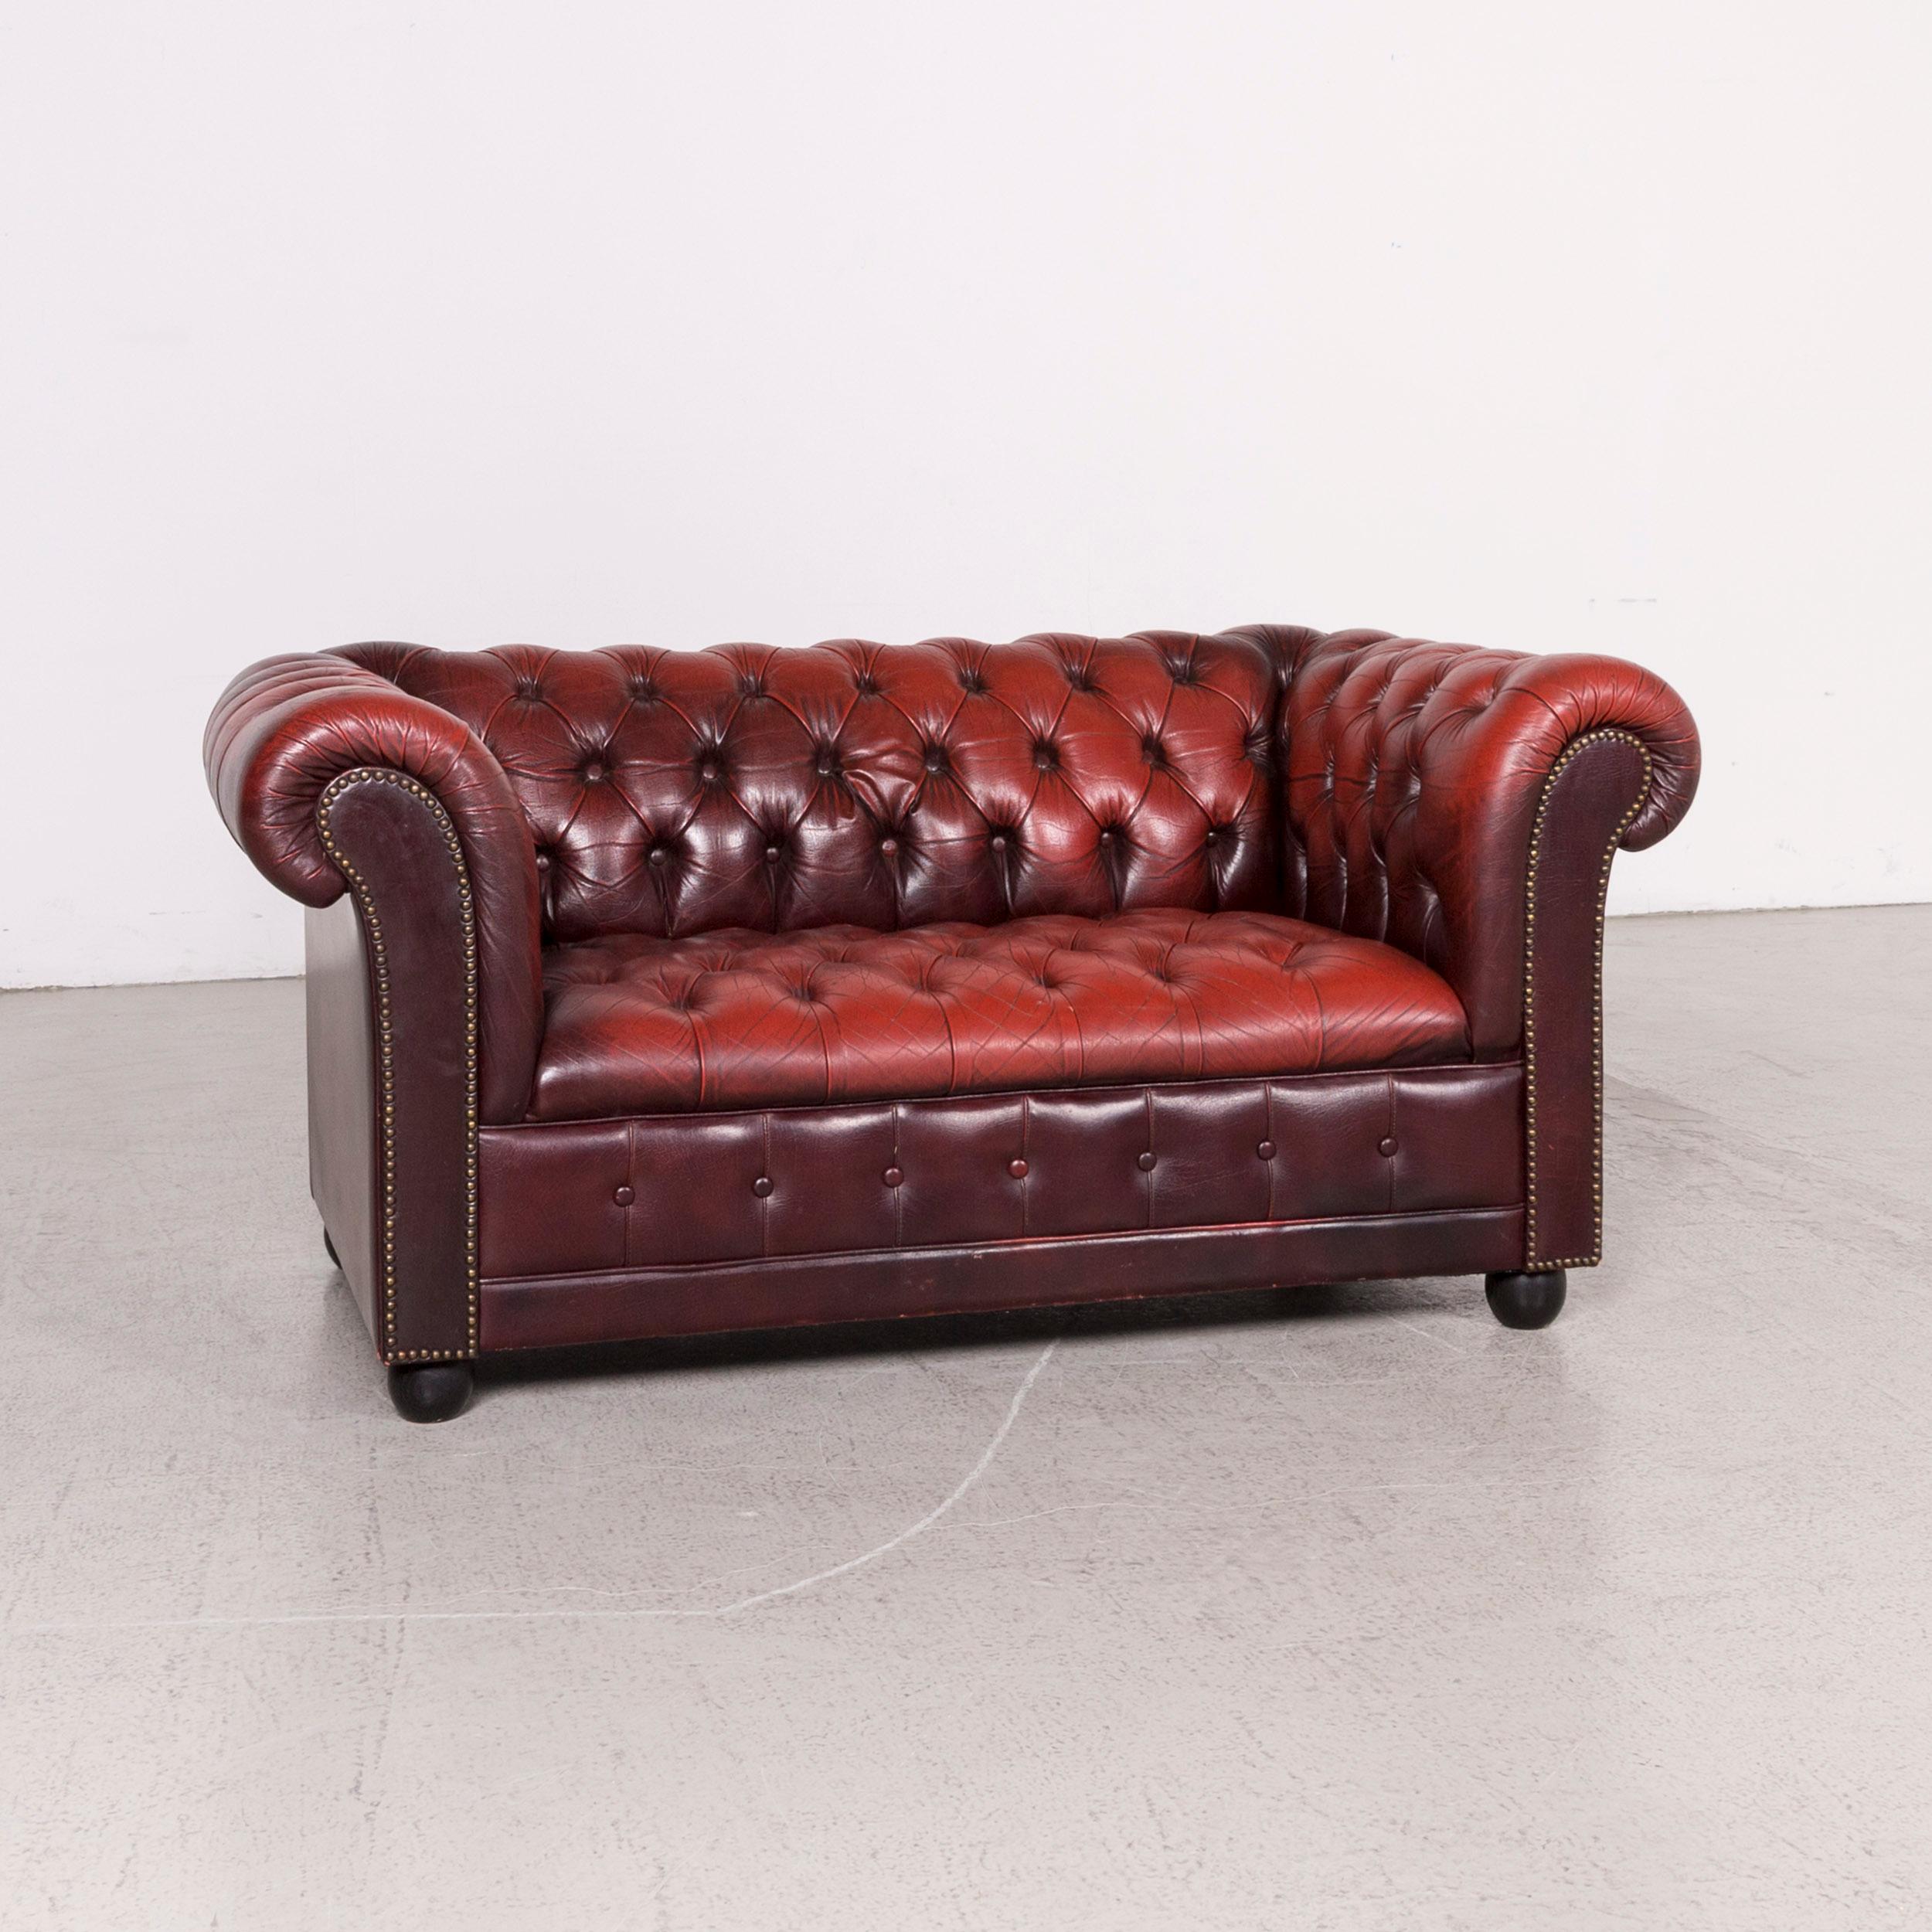 vintage red leather sofa